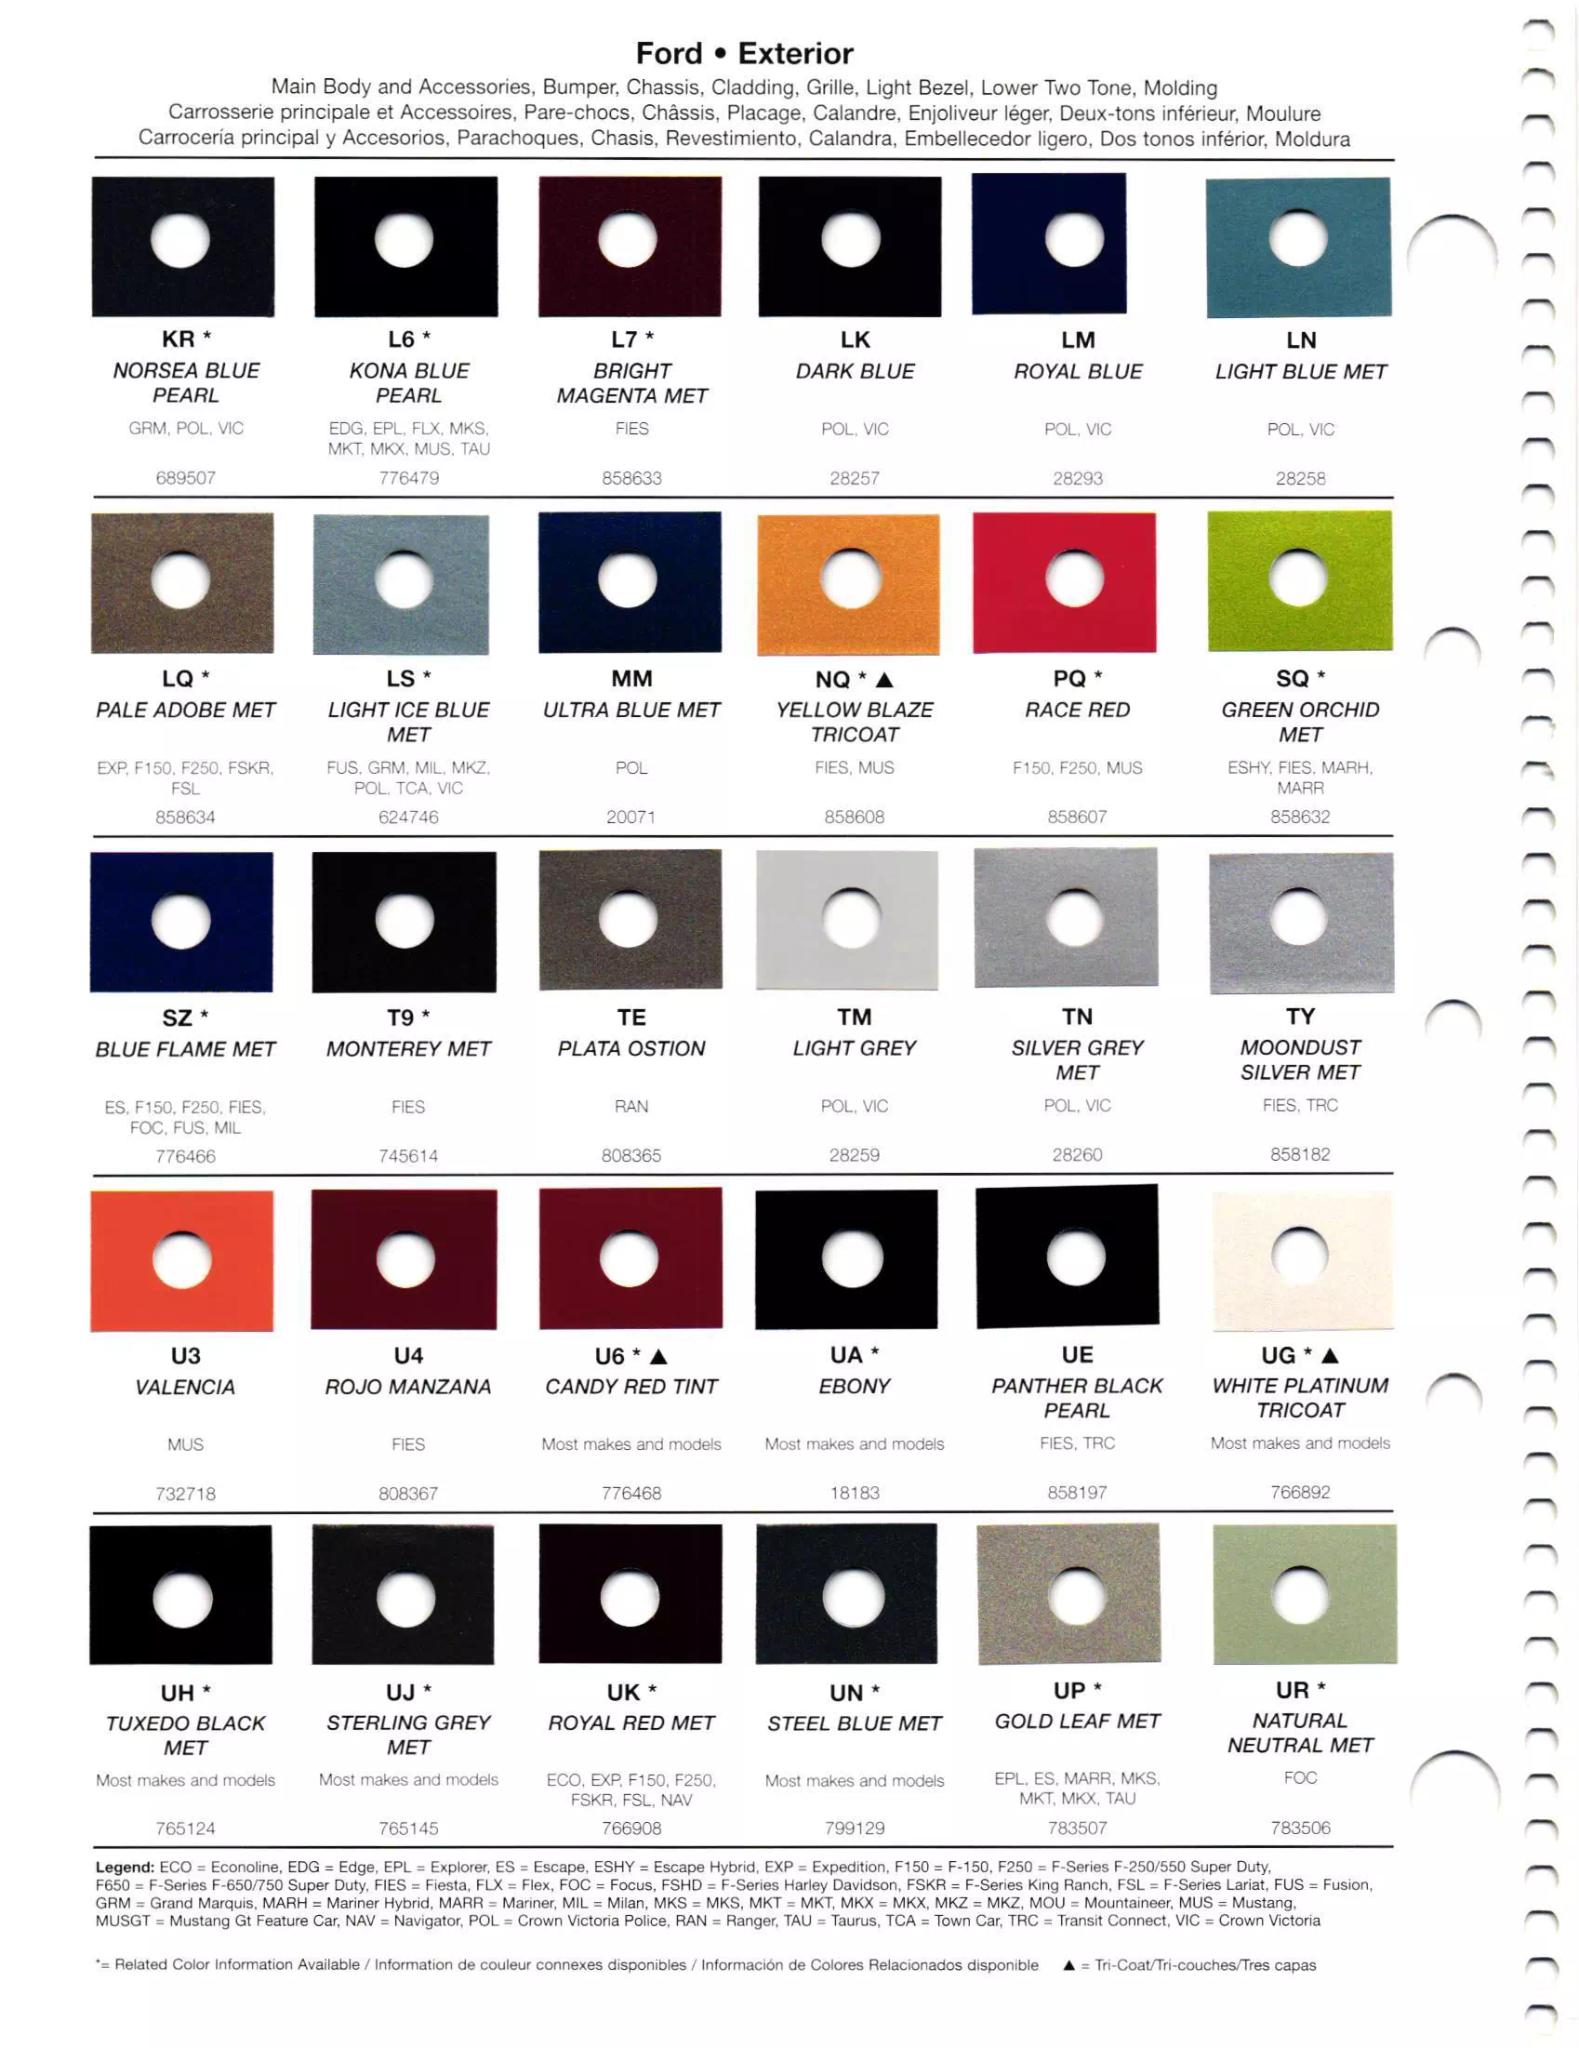 Paint codes, and their ordering stock numbers for their color on 2011 vehicles